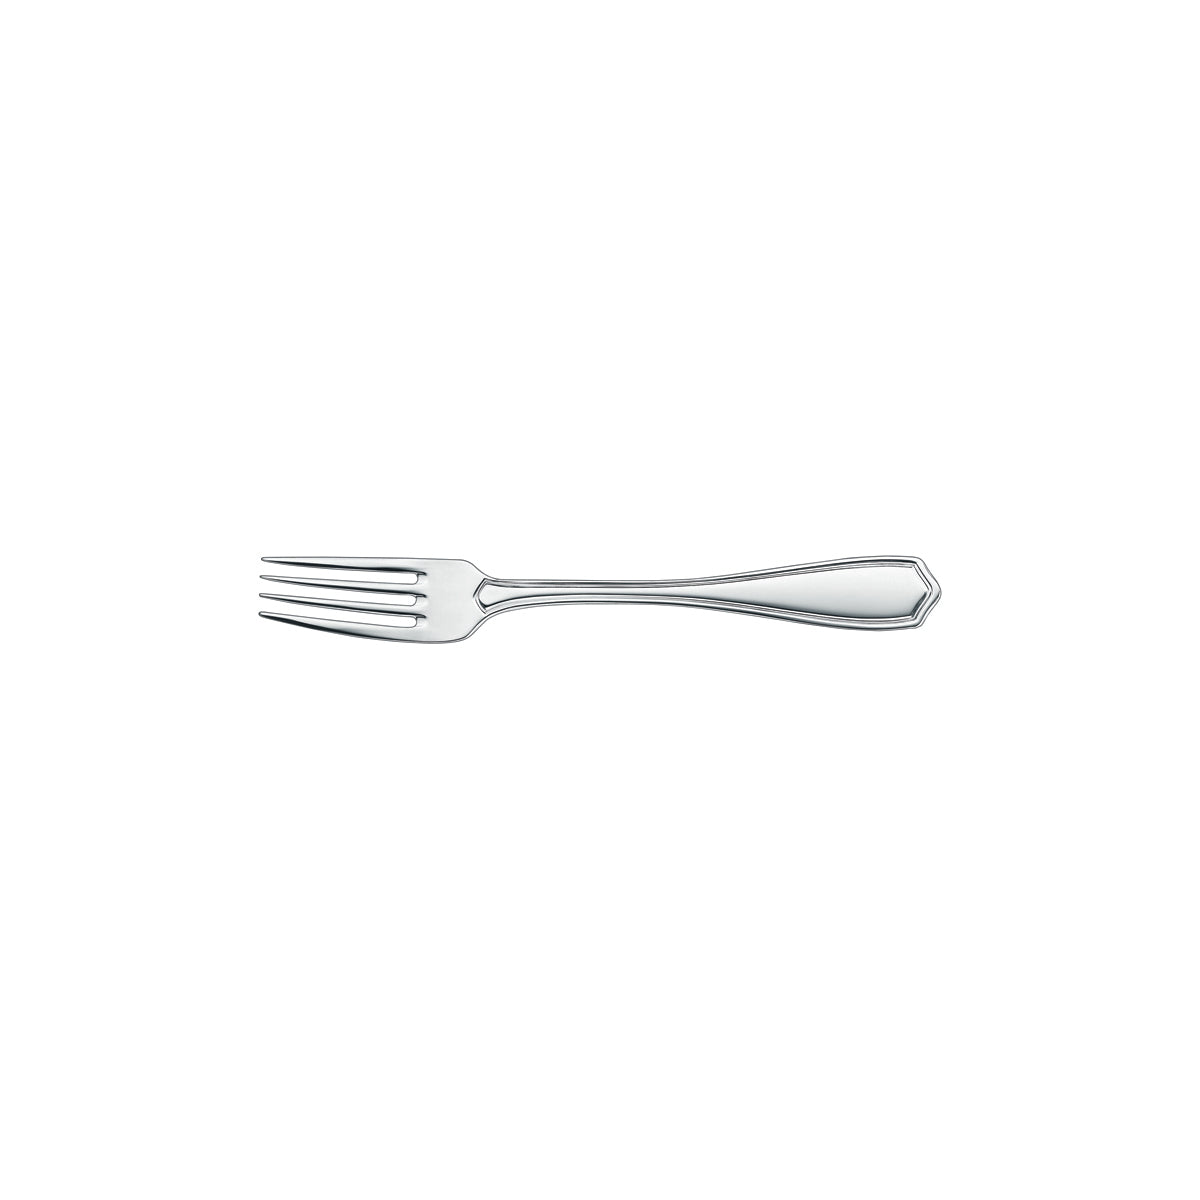 10.4802.6060 WMF Residence Table Fork Silverplated Tomkin Australia Hospitality Supplies